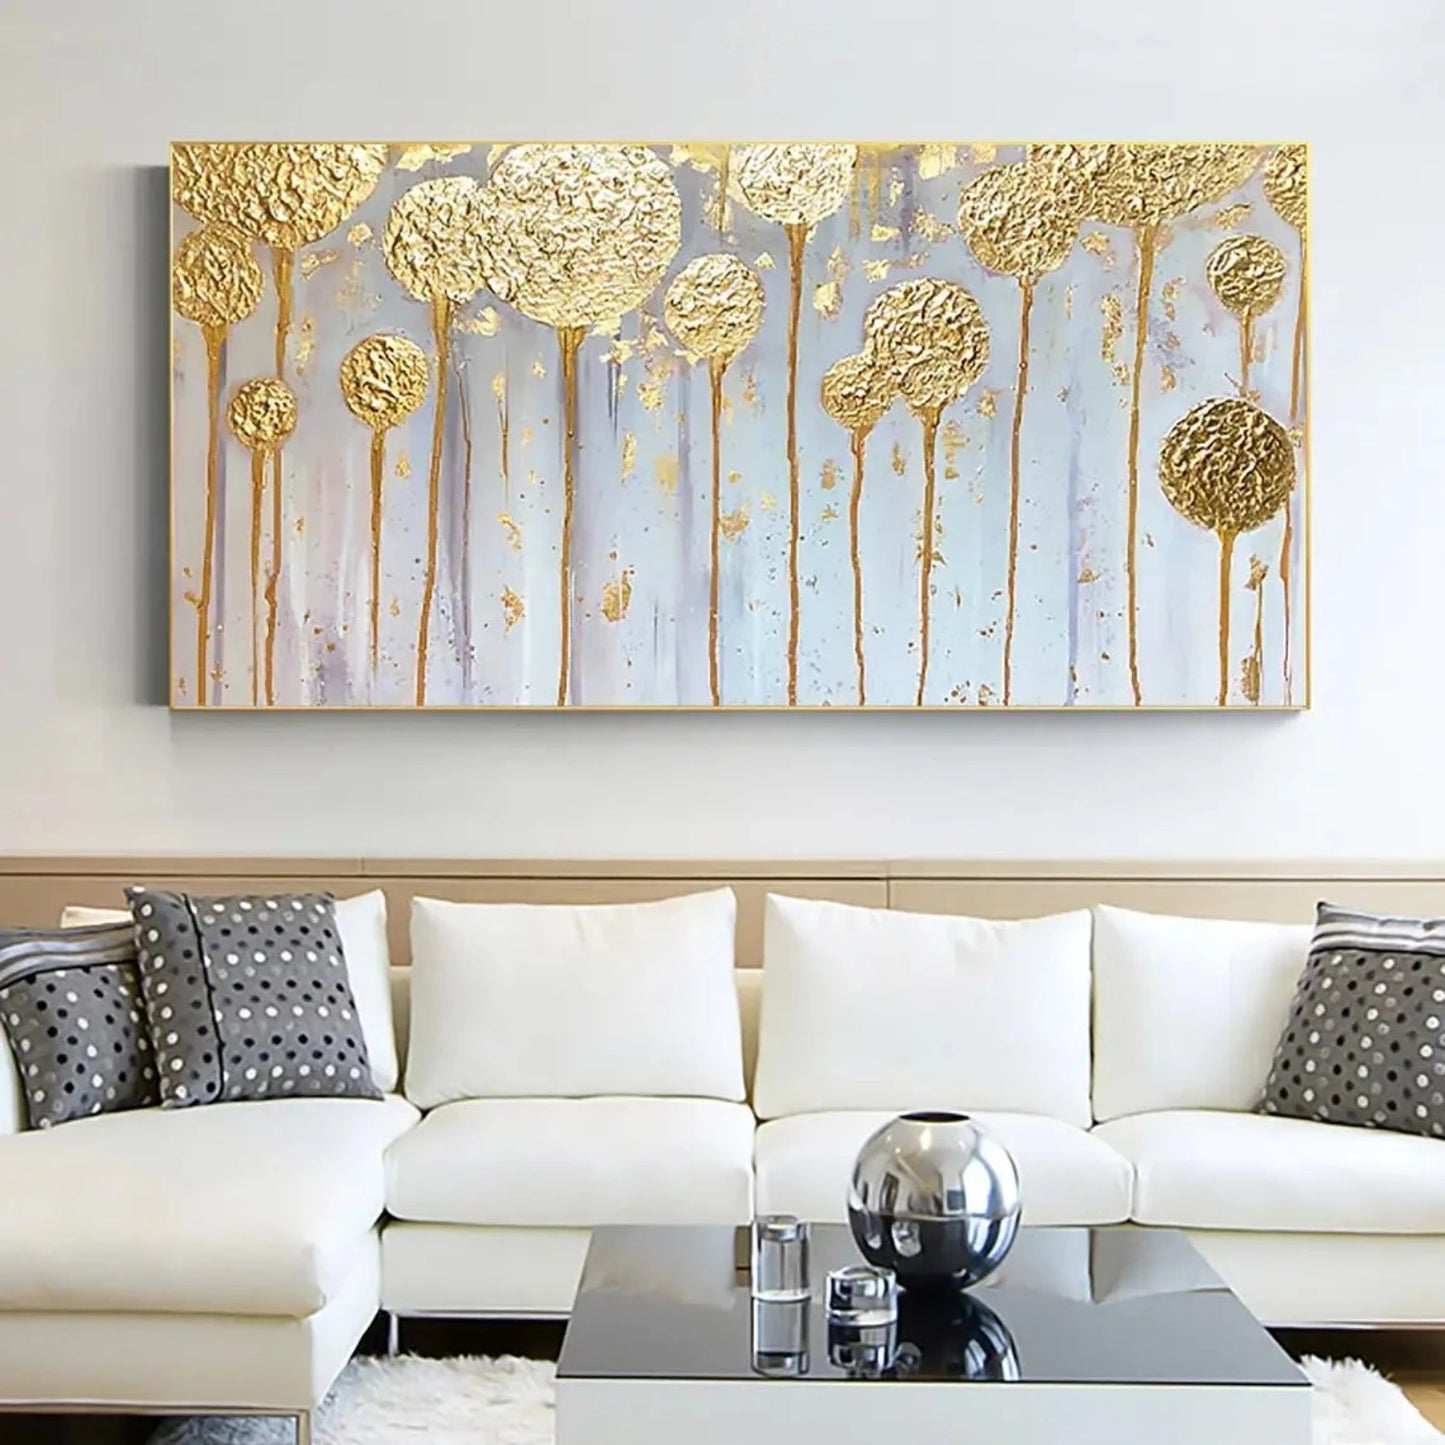 Large Gold Foil Floral Heavy Textured Oil Painting